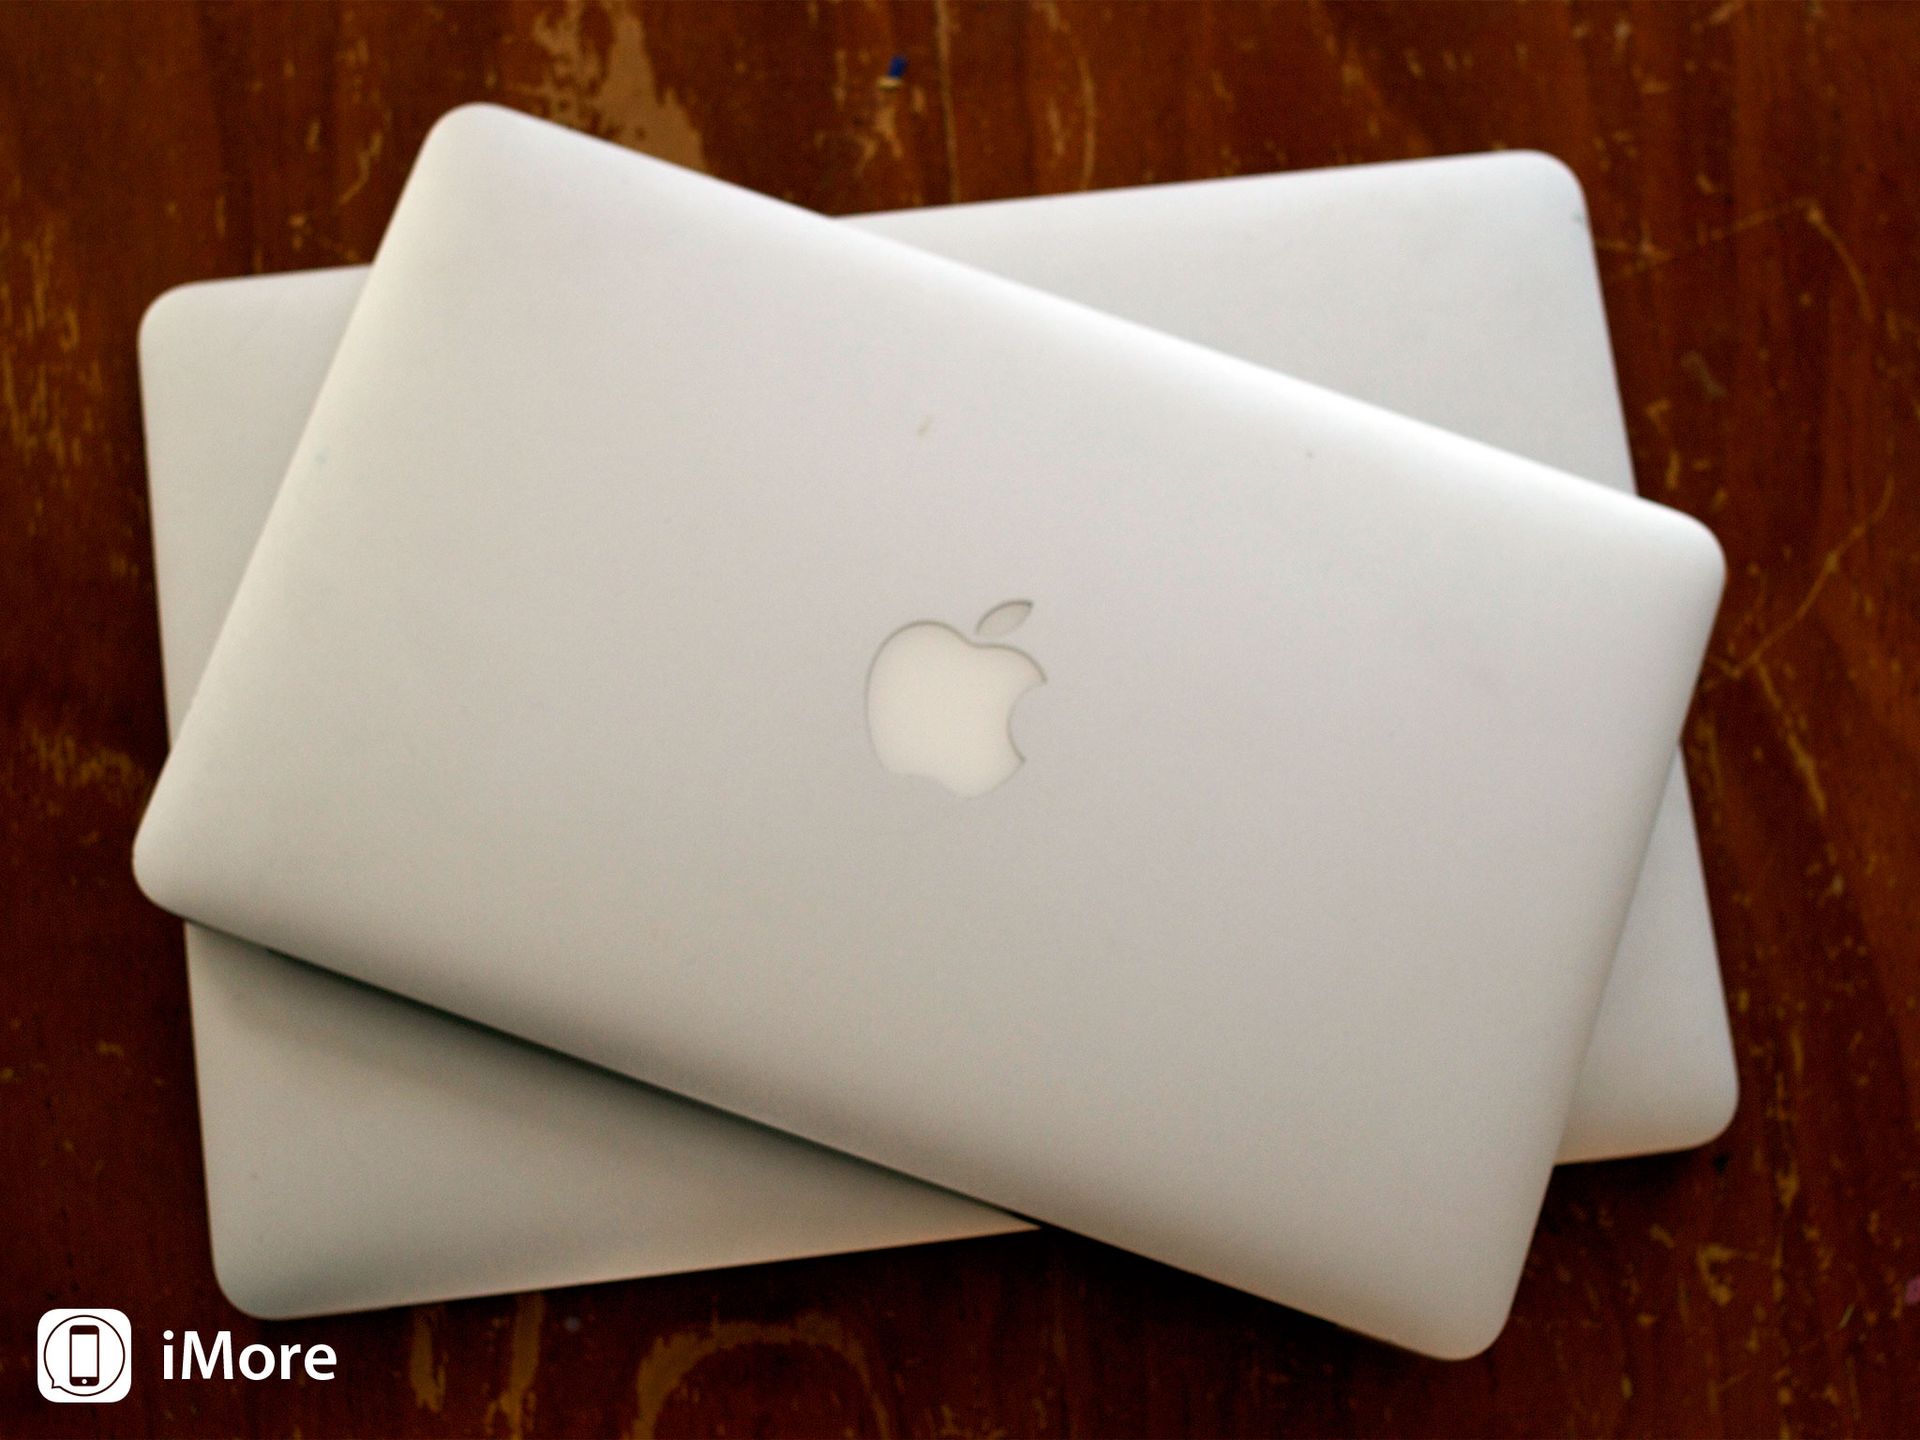 The new MacBook Air is cheaper and faster, but is it worth buying? iMore